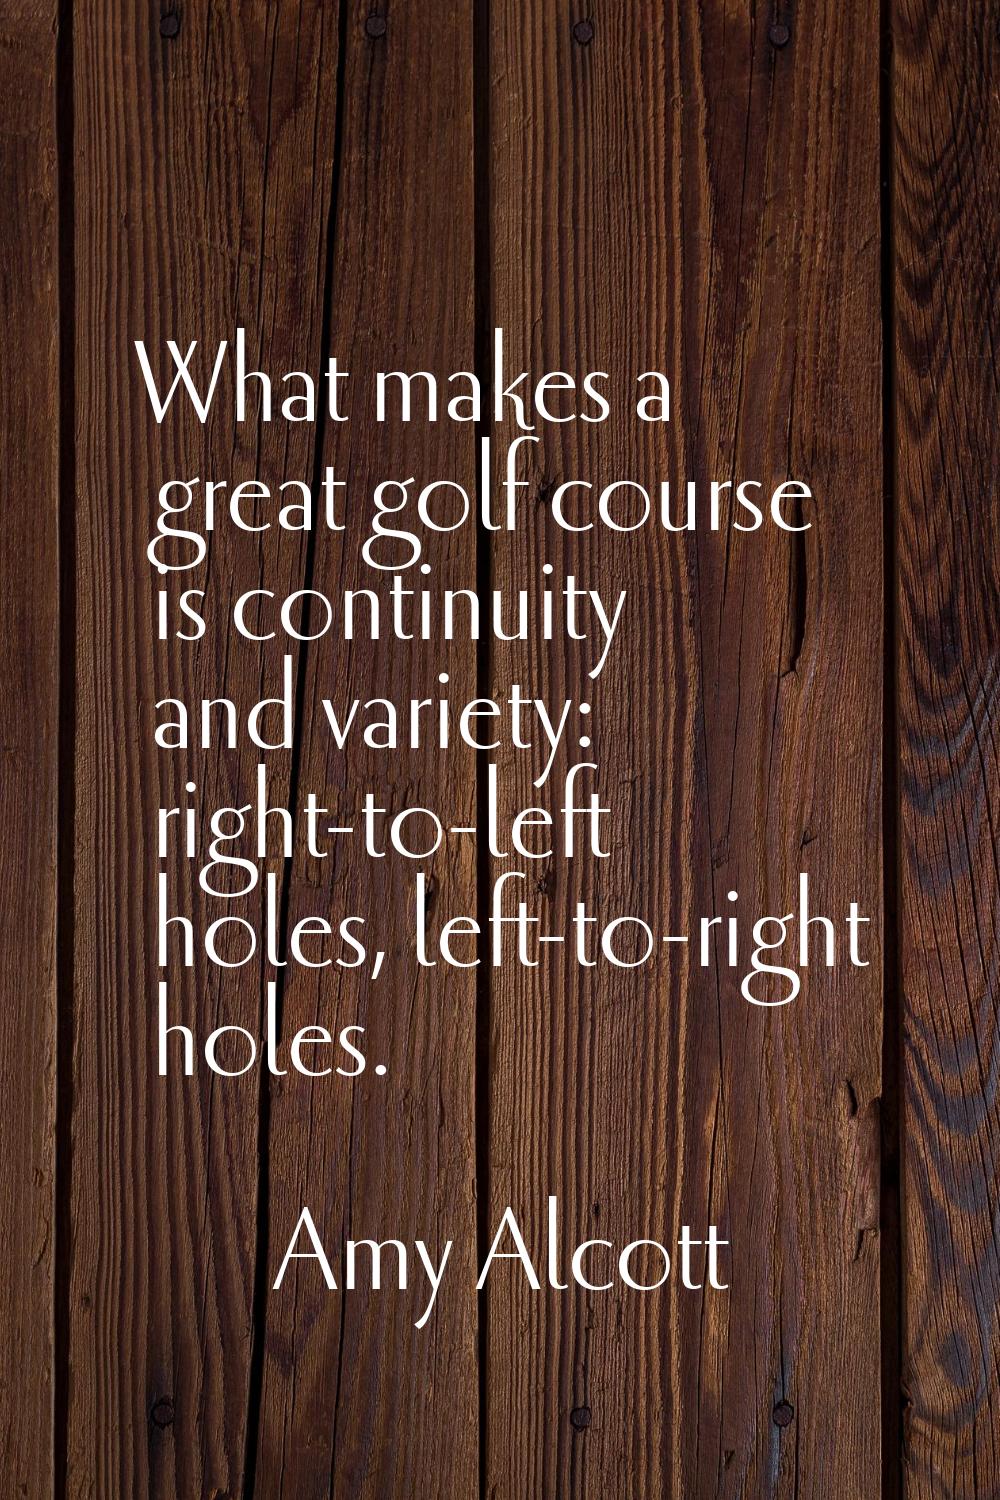 What makes a great golf course is continuity and variety: right-to-left holes, left-to-right holes.